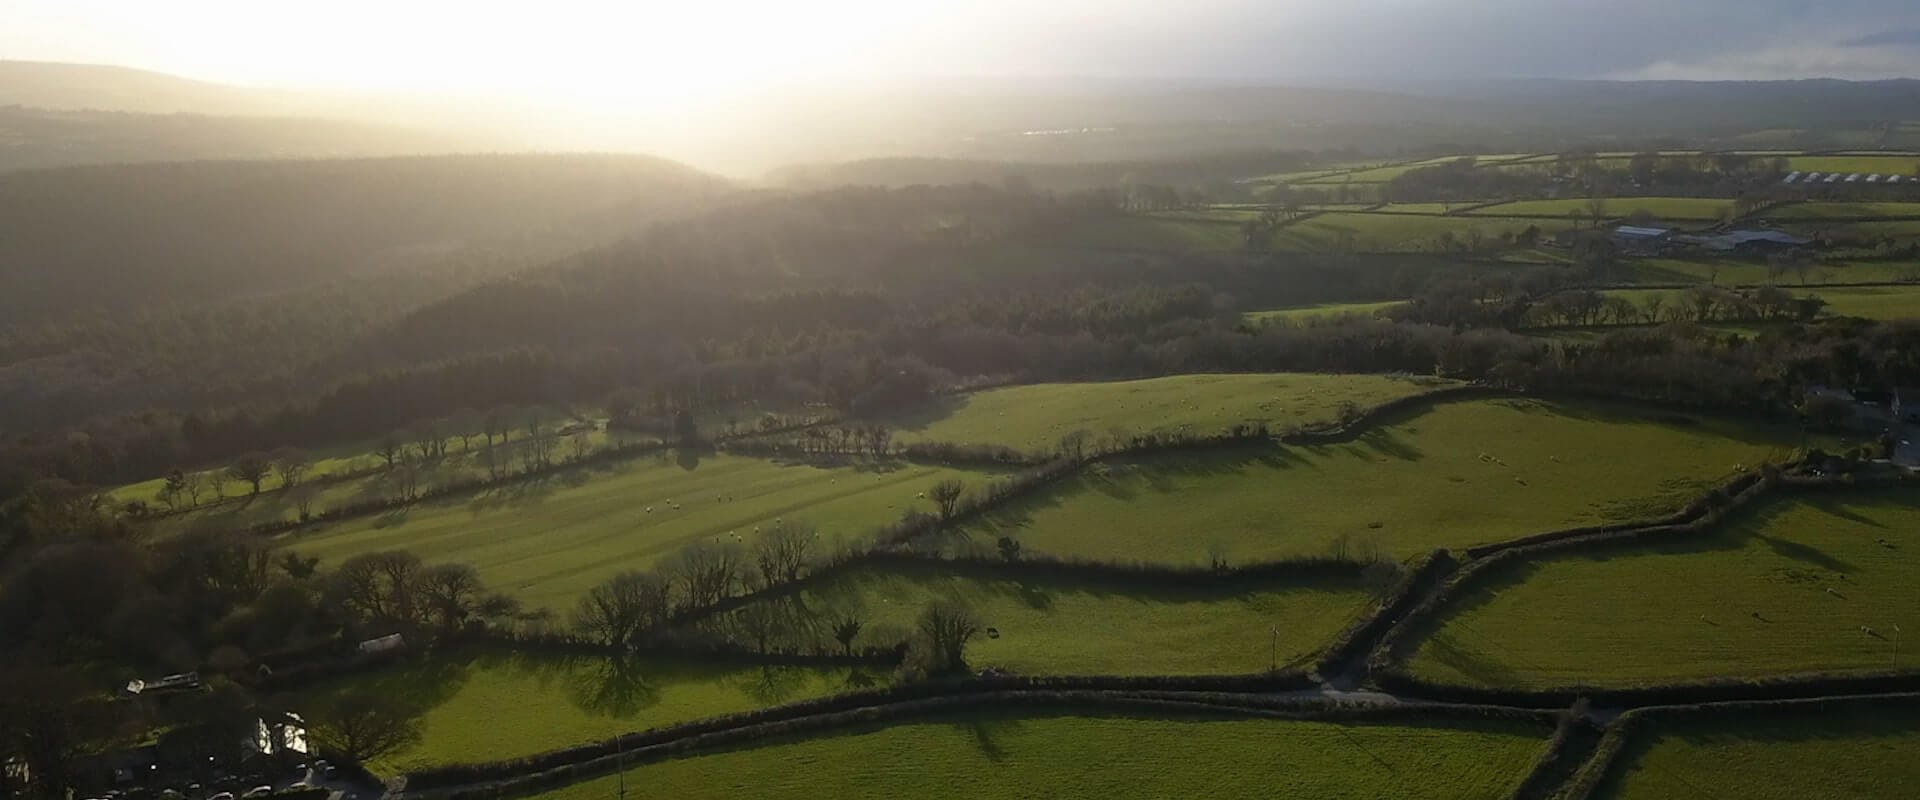 West facing Aerial drone shot facing farmers fields with a golden sunset